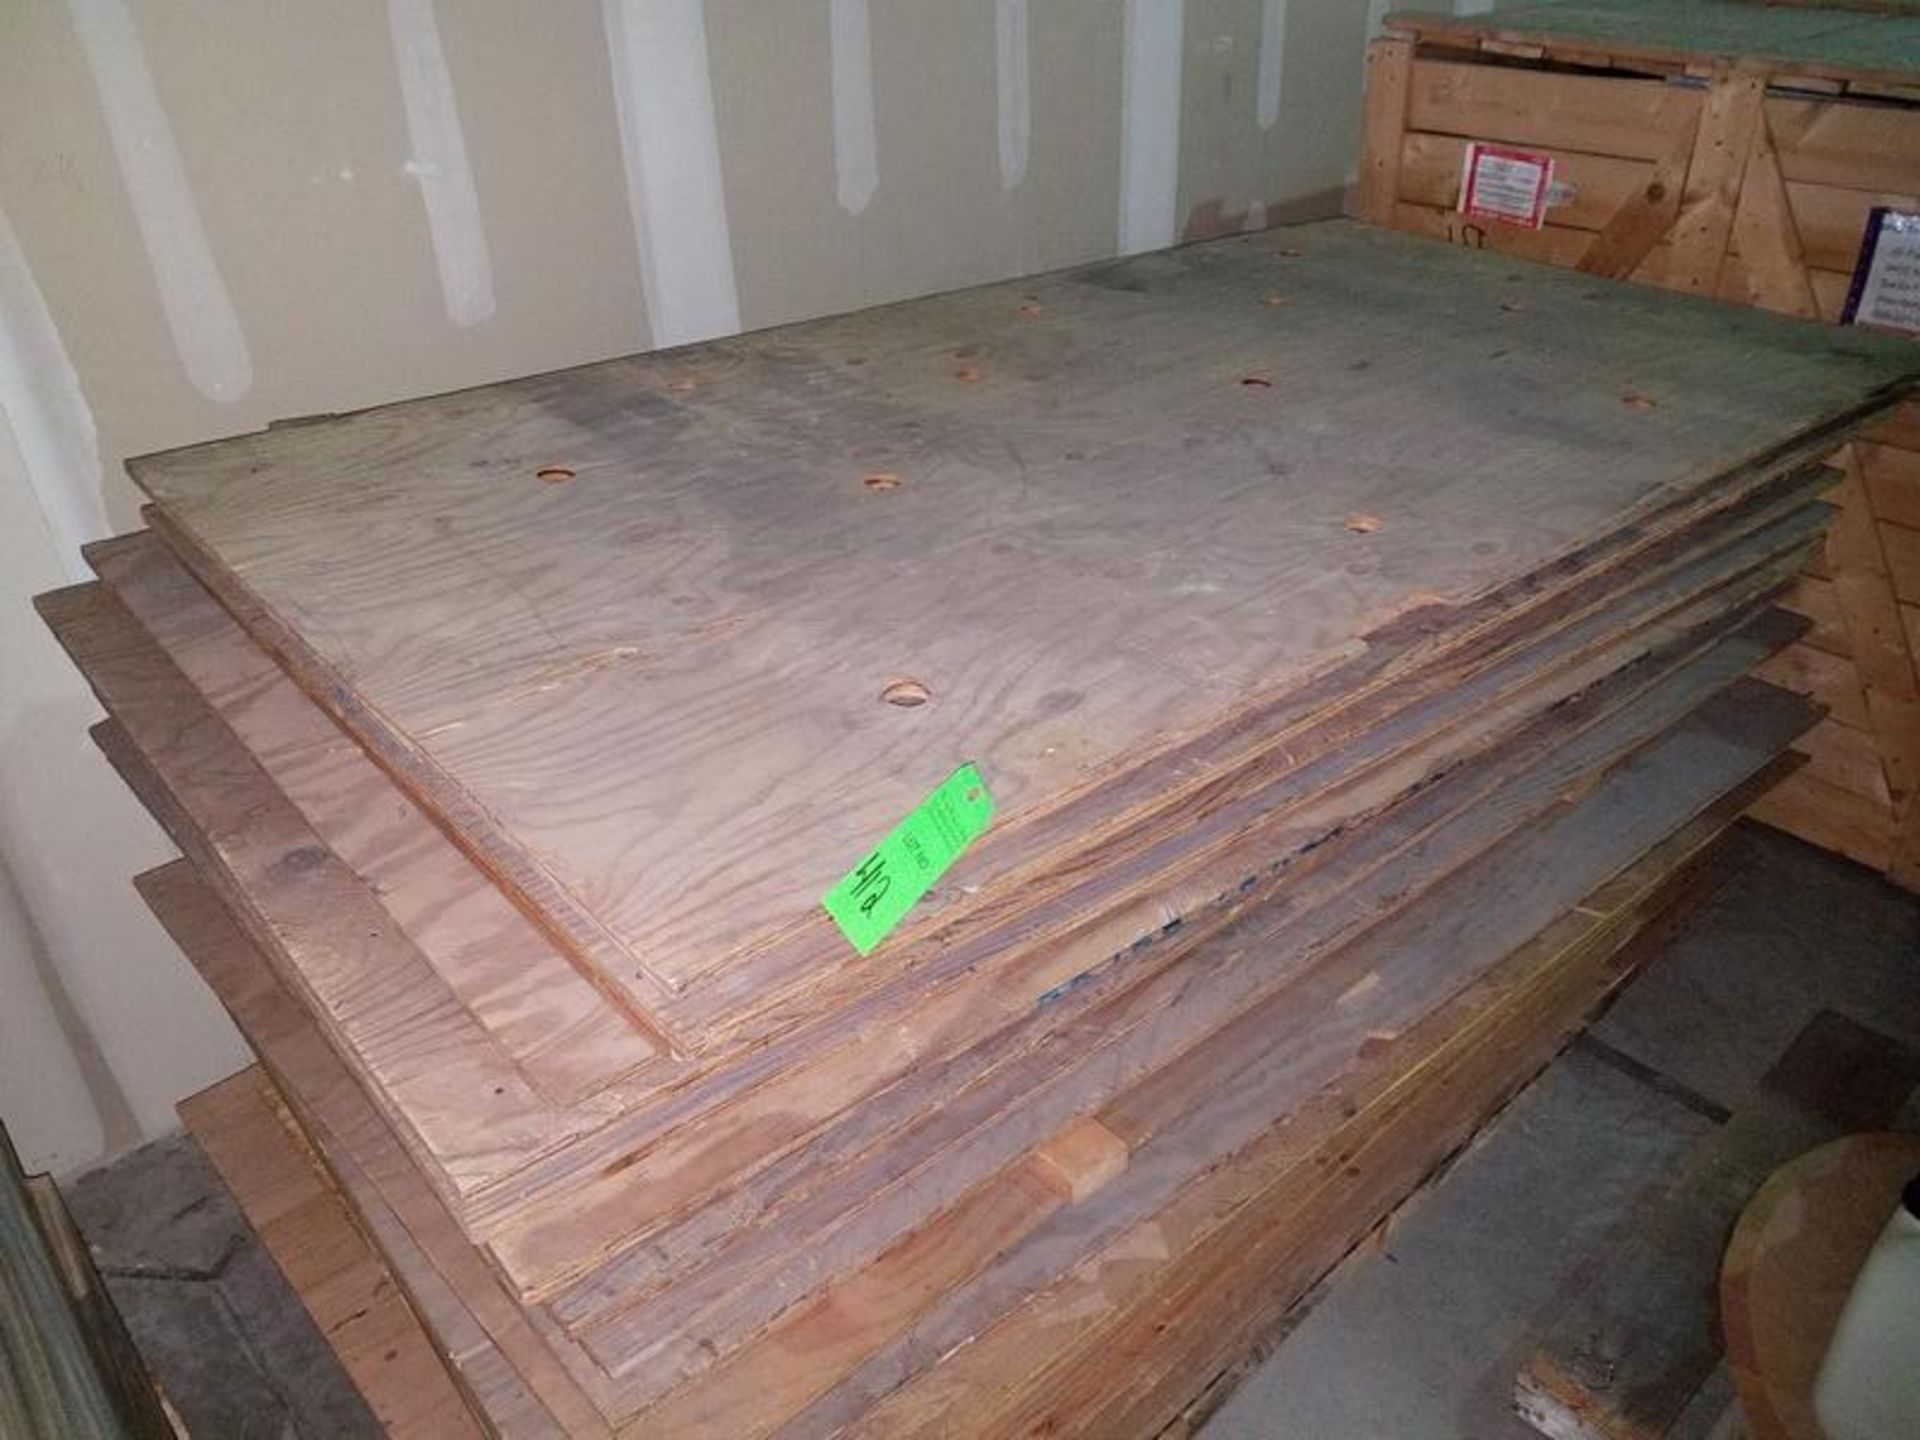 Lot of (20) Plywood Skids, 48" x 96" - Image 2 of 2